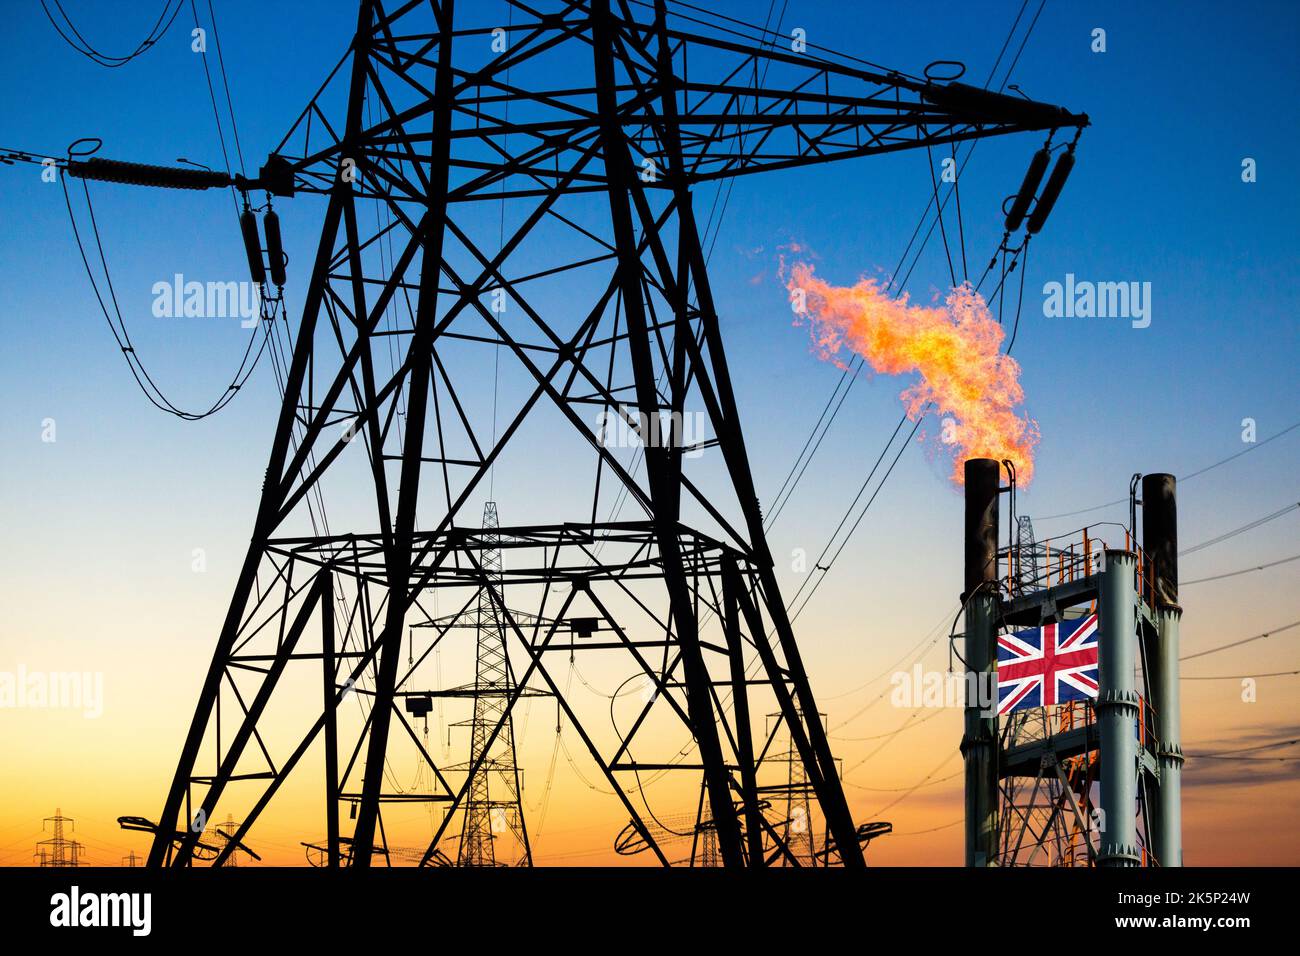 Gas flare stack and electricity pylon. UK Cost of living crisis, rising gas, energy prices, Russian gas, Ukraine war, Europe, North Sea gas... concept Stock Photo